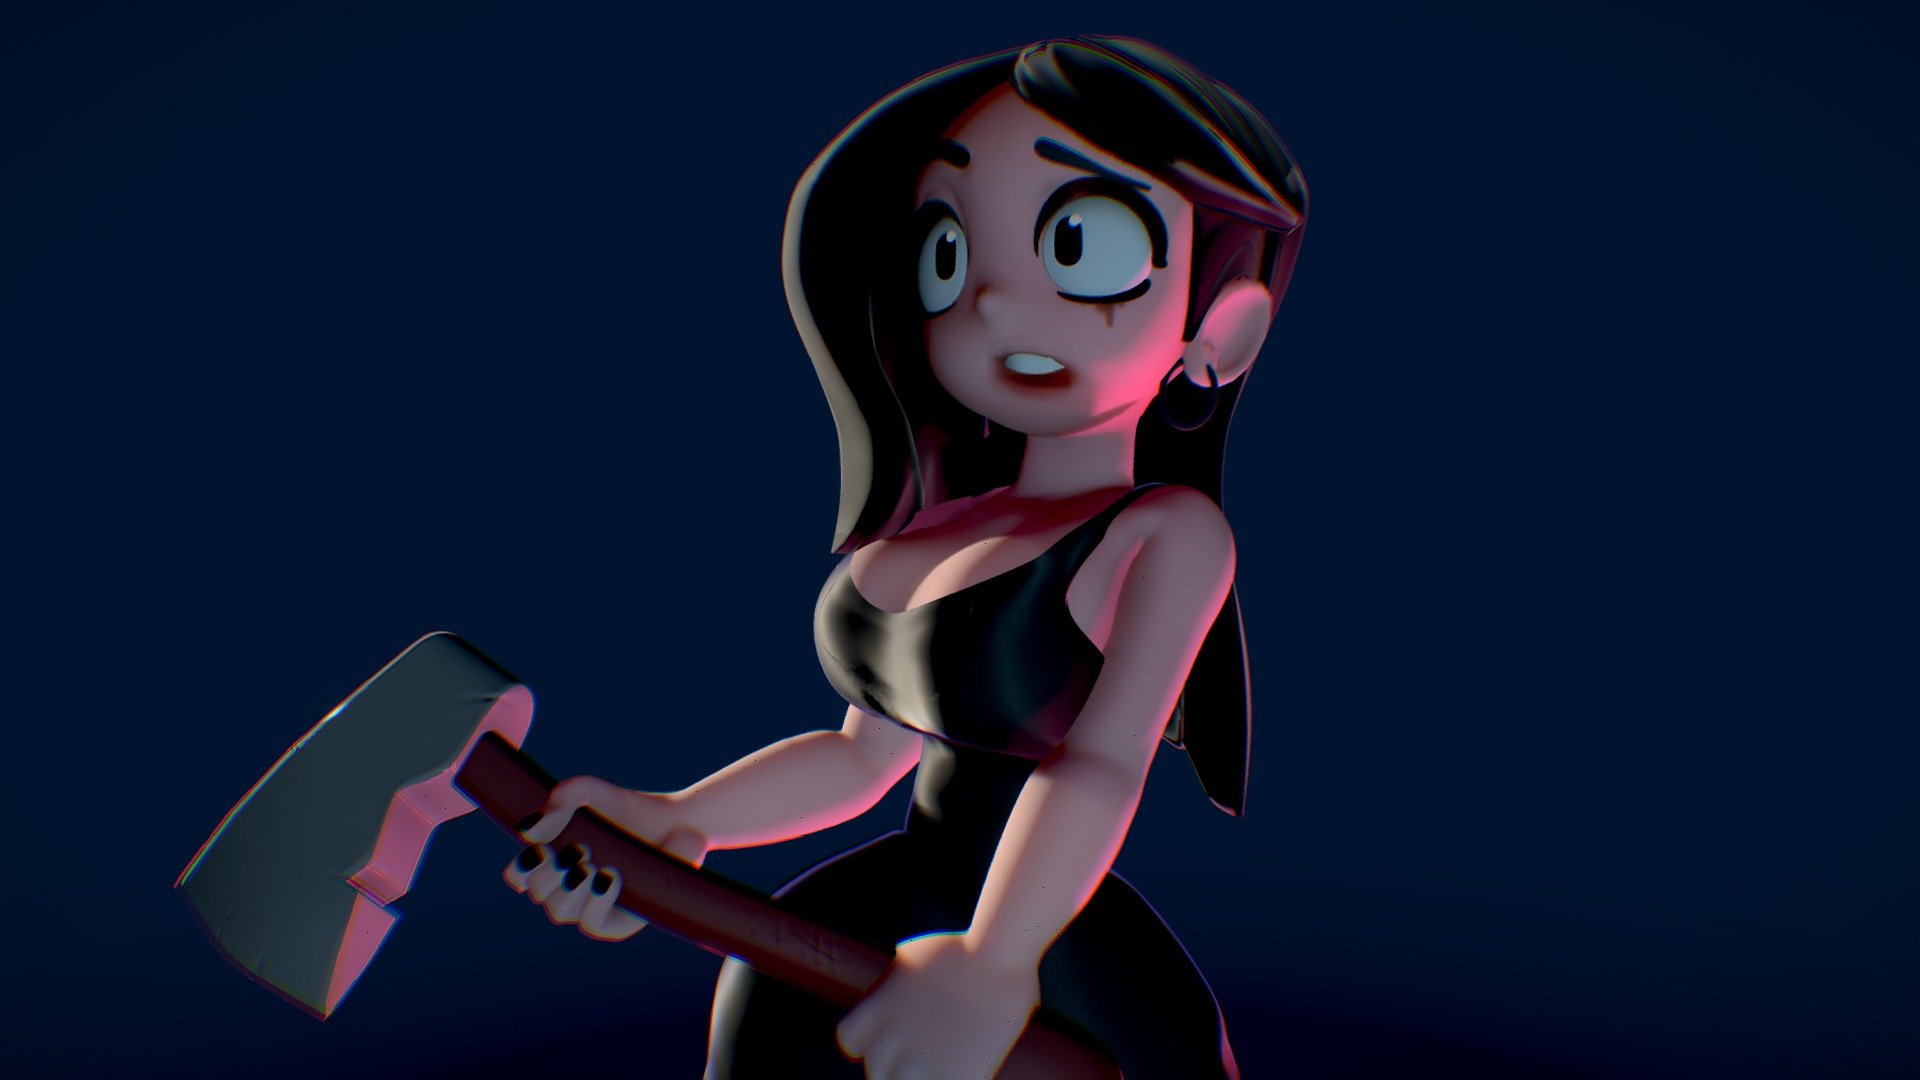 Did the prompt featruing the cute gal drawn by tomaco_sunderland_art! hope you enjoy the baked lighting on this model. Software used: Zbrush and Blender.

This is the version of the model with dynamic PBR texturing!

**Go follow this amazing artist! **
https://www.instagram.com/p/Cjhz6h1OQs8/

Additional renders and original reference.


TOMACOS DTIYST

Leave a comment on what artist should get the KINK treatment in 3d! - #TOMACO40K GIRL DTIYS (2D to 3D) PBR - 3D model by K.INK INK (@karlaaldana) 3d model